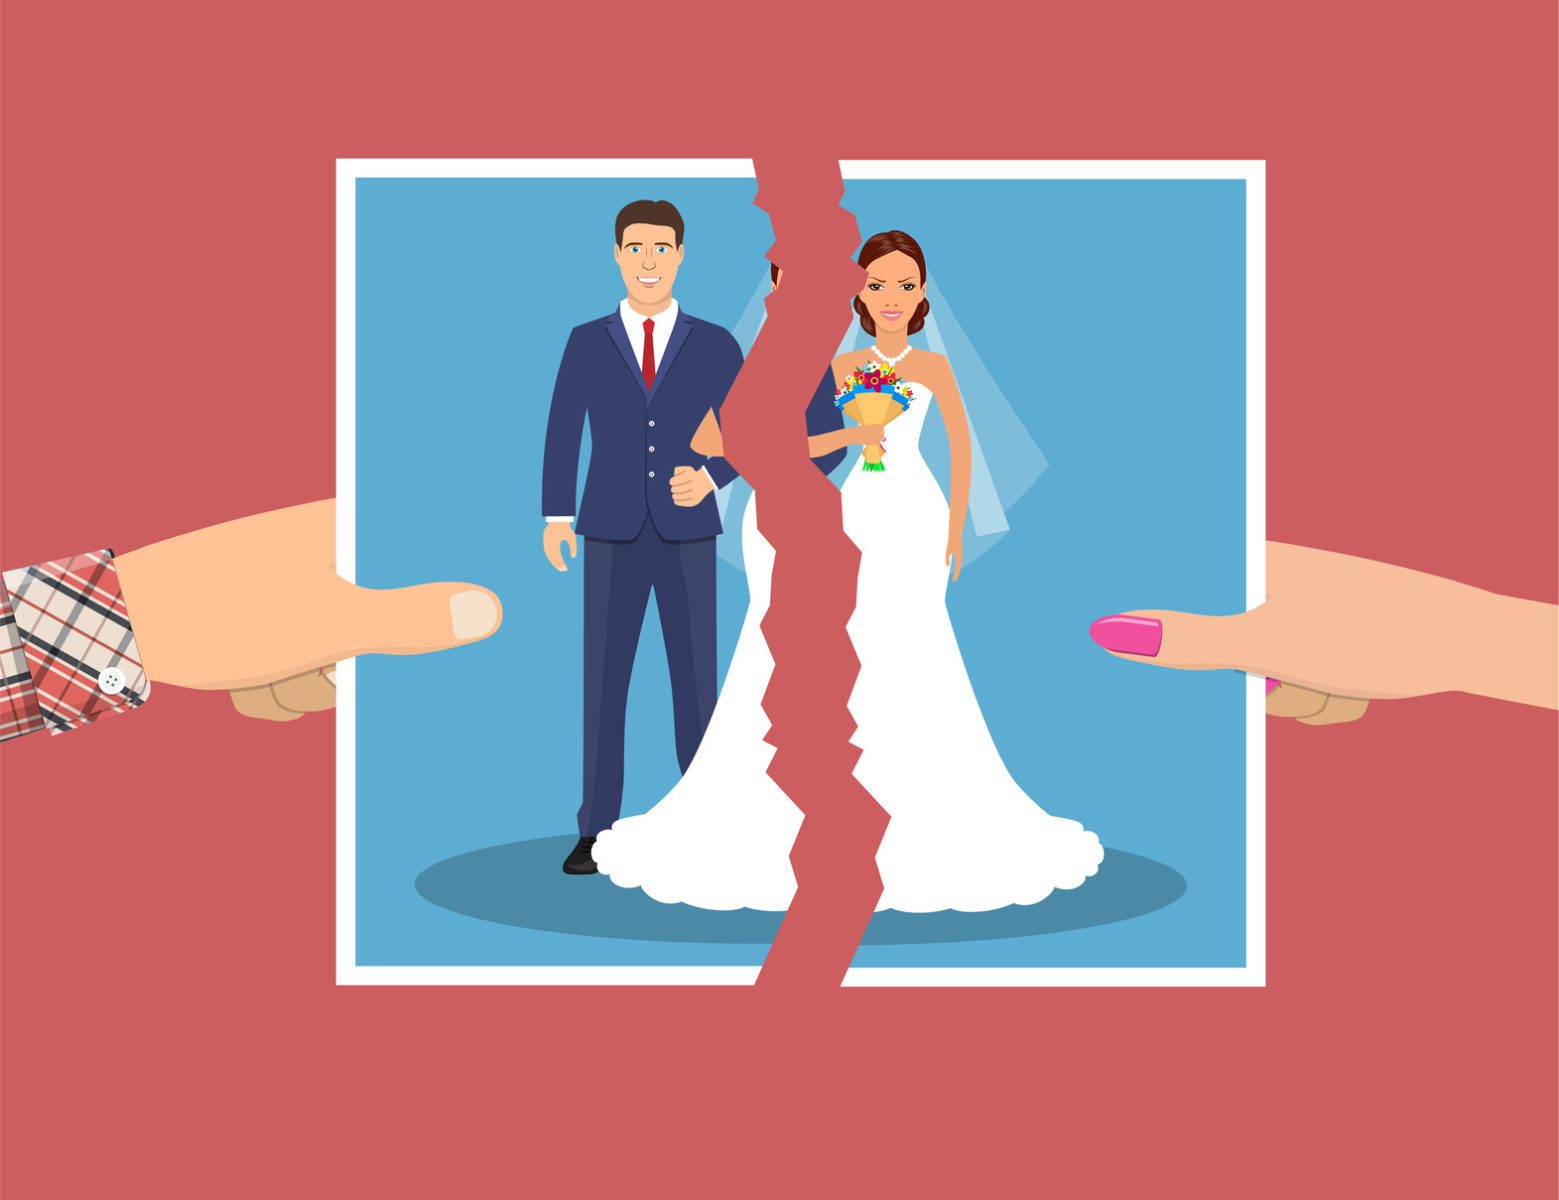 What You Need to Know Before Filing for Divorce